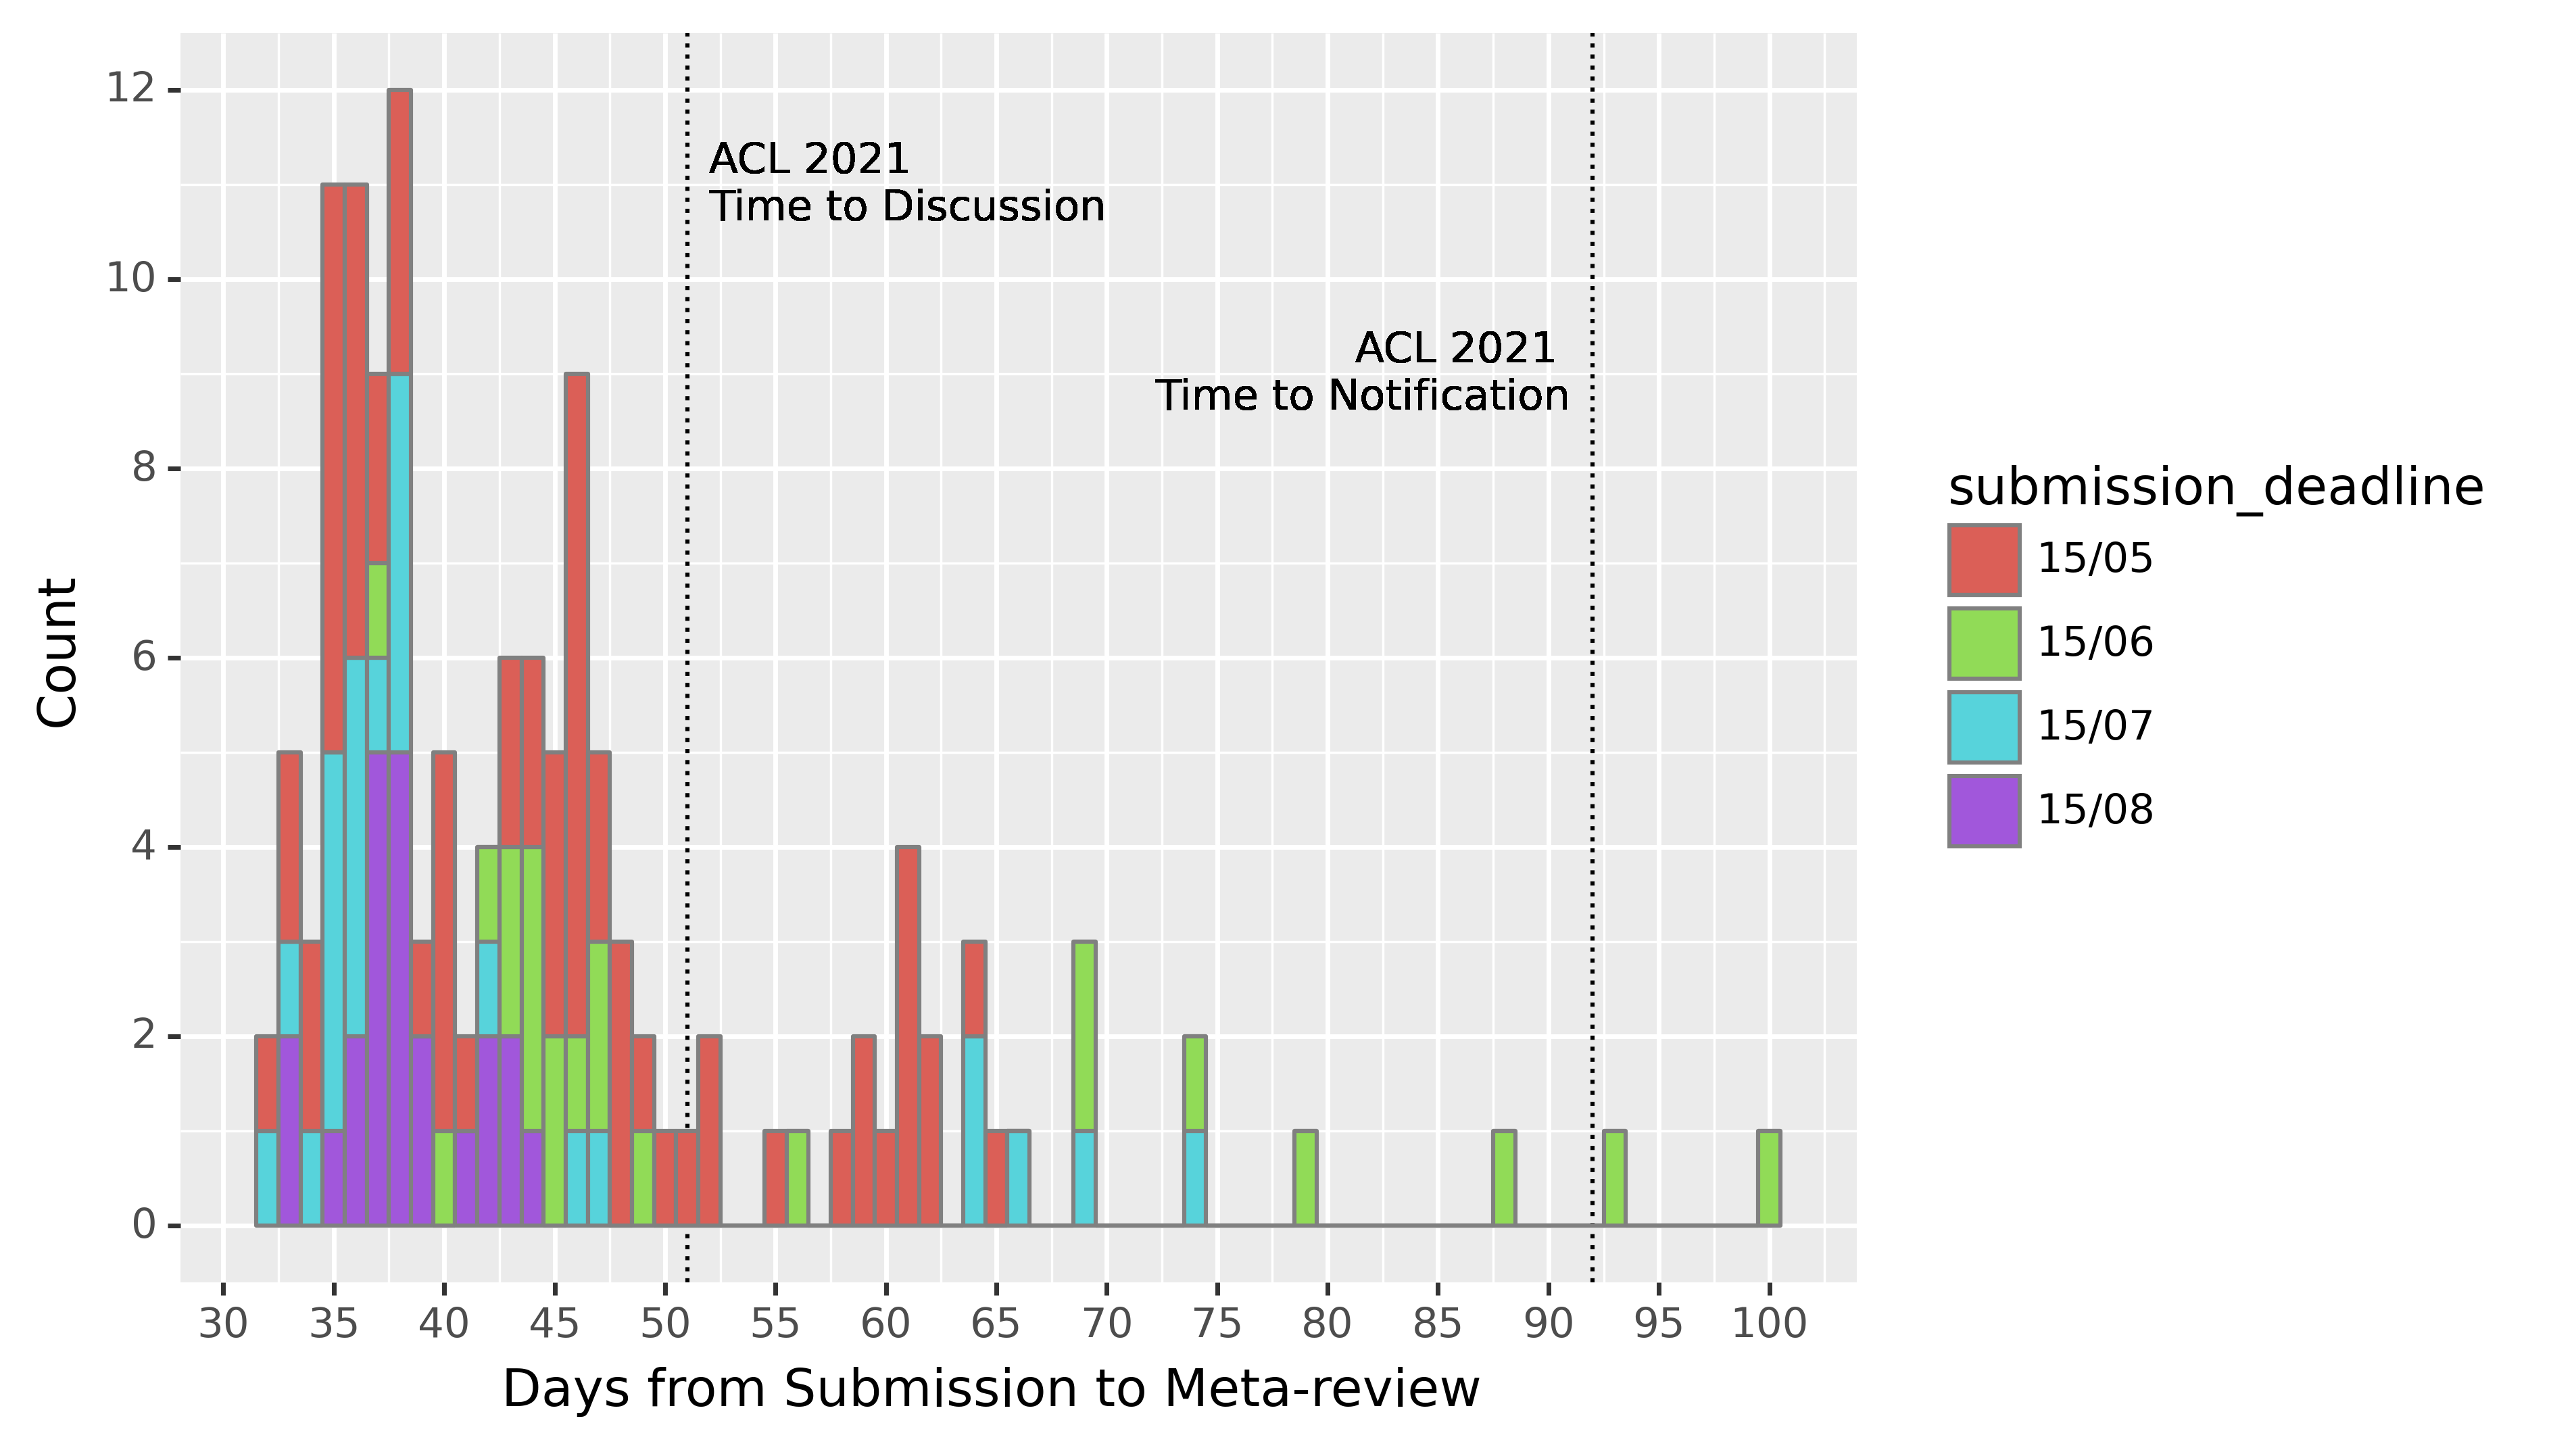 Days from Submission to Meta-Review